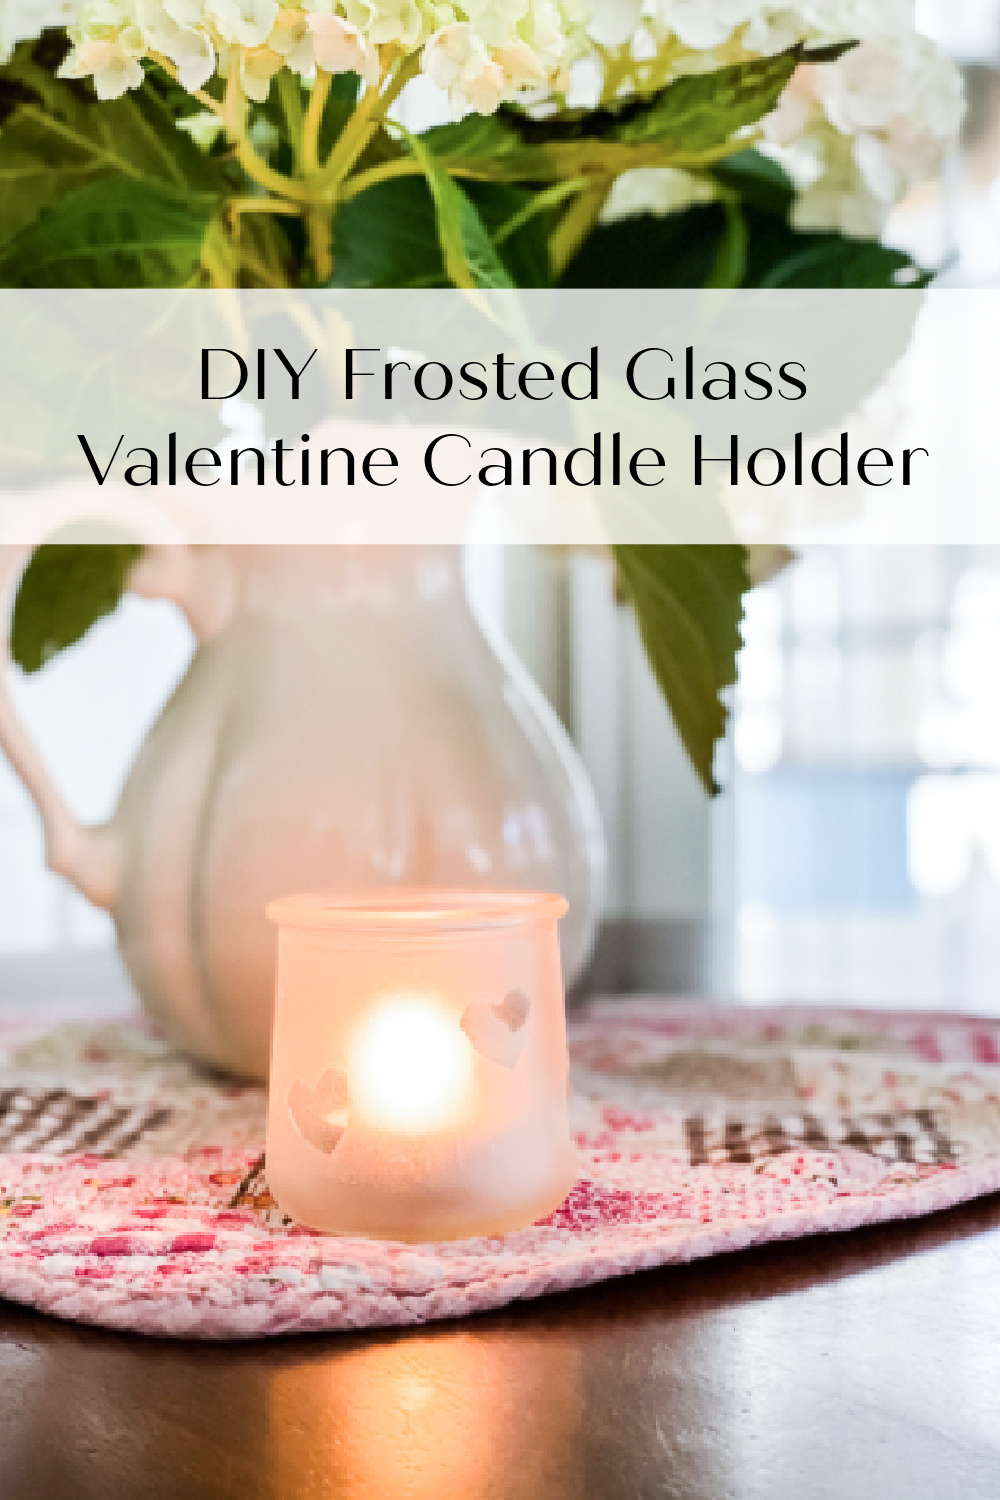 How to Make a DIY Frosted Glass Valentine Candle Holder - My